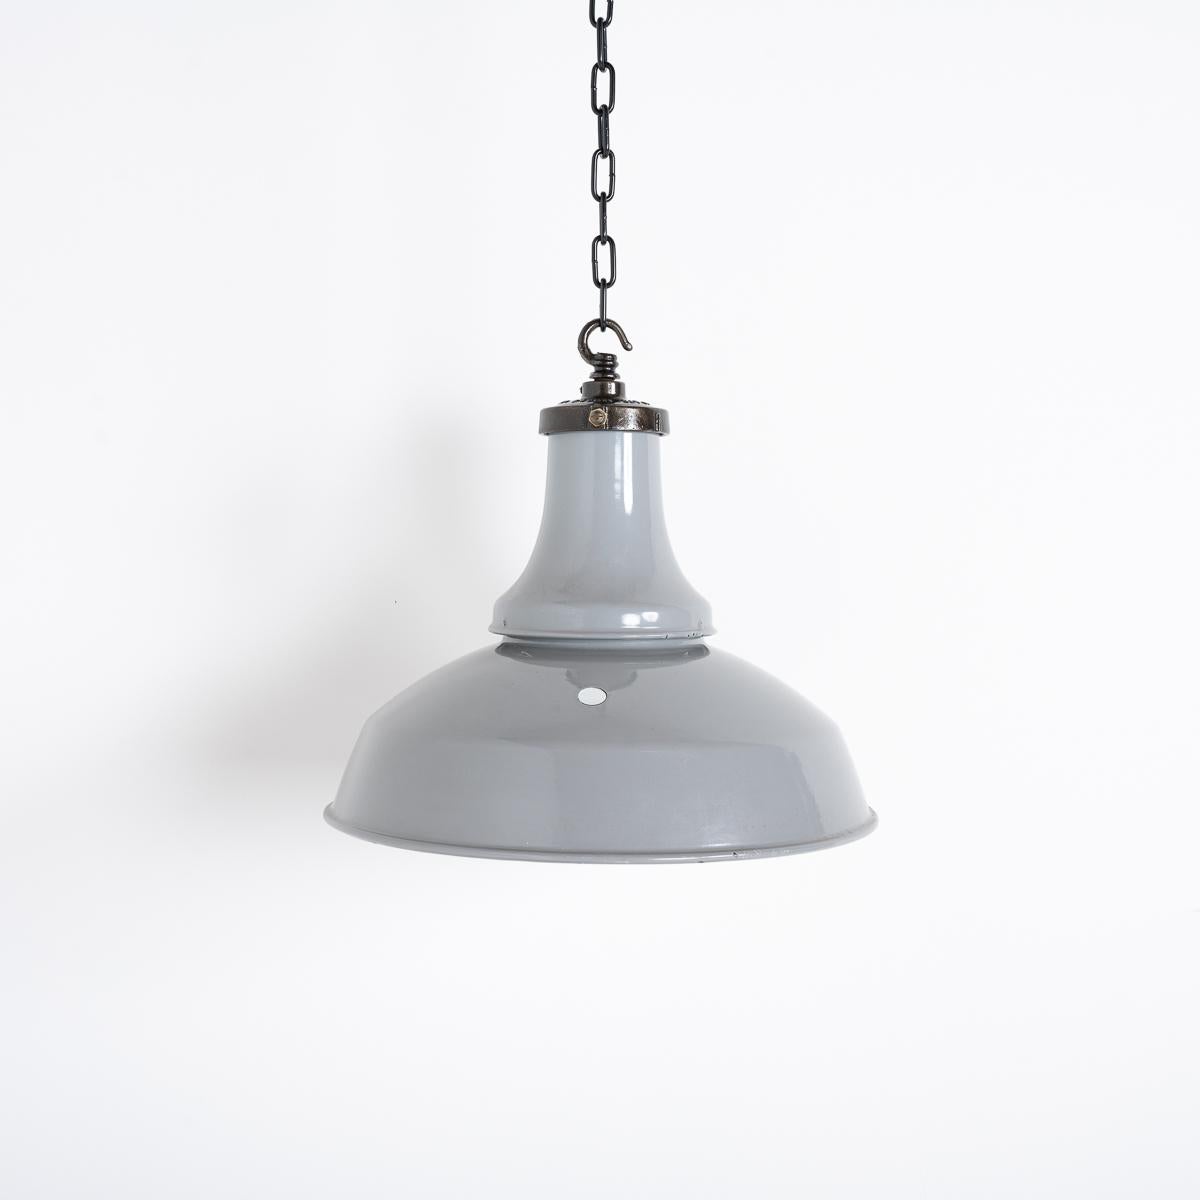 Reclaimed Industrial Vitreous Enamelled Pendant Lights by Benjamin Electric For Sale 5